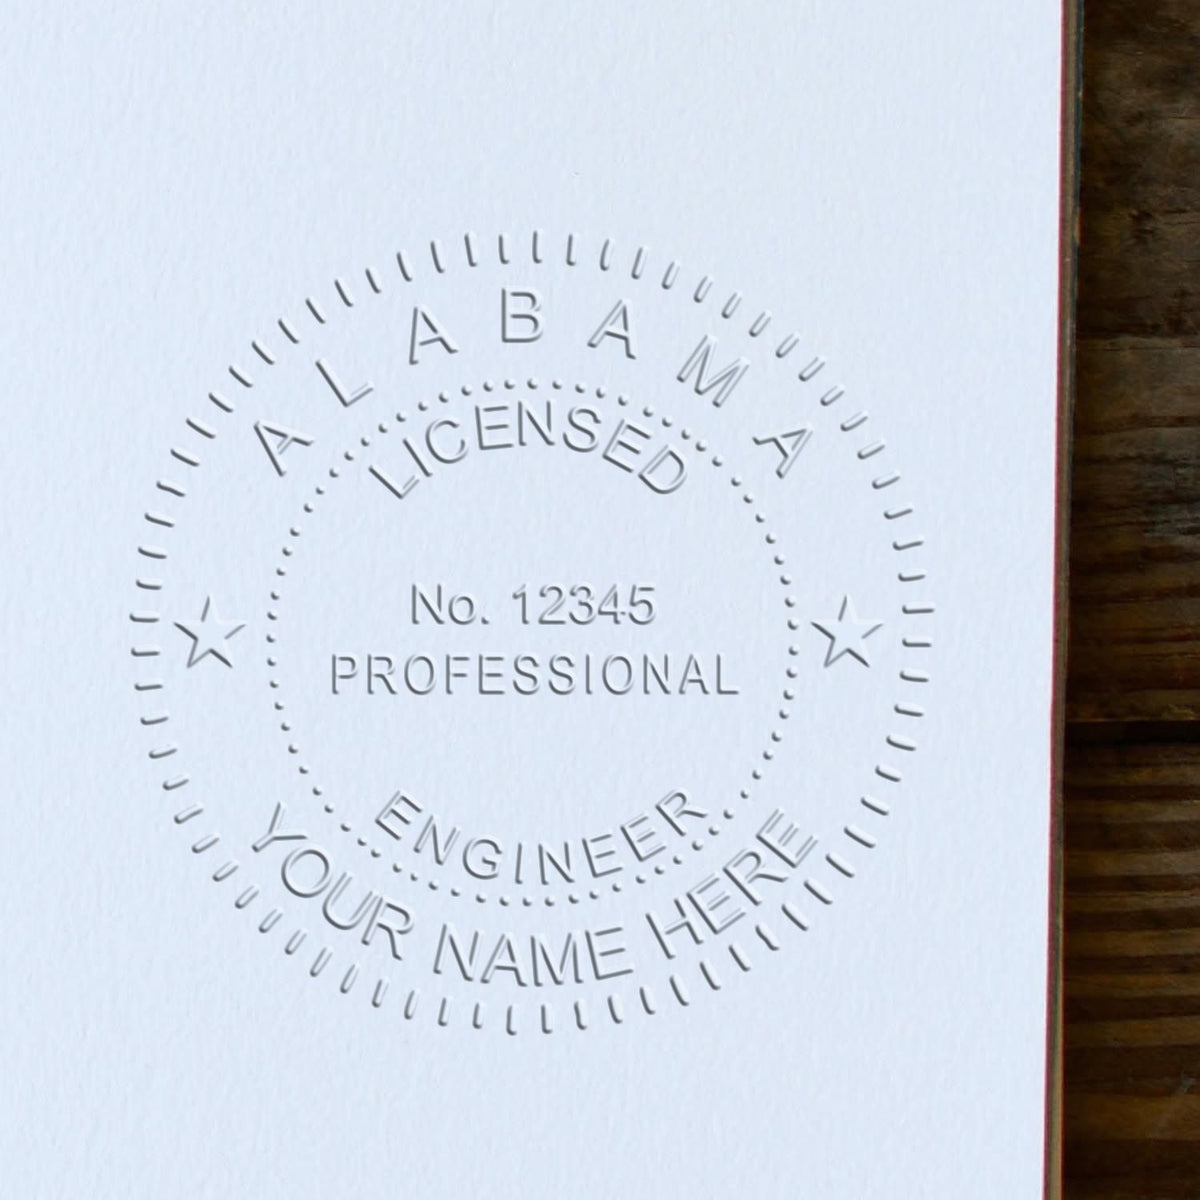 The State of Alabama Extended Long Reach Engineer Seal stamp impression comes to life with a crisp, detailed photo on paper - showcasing true professional quality.